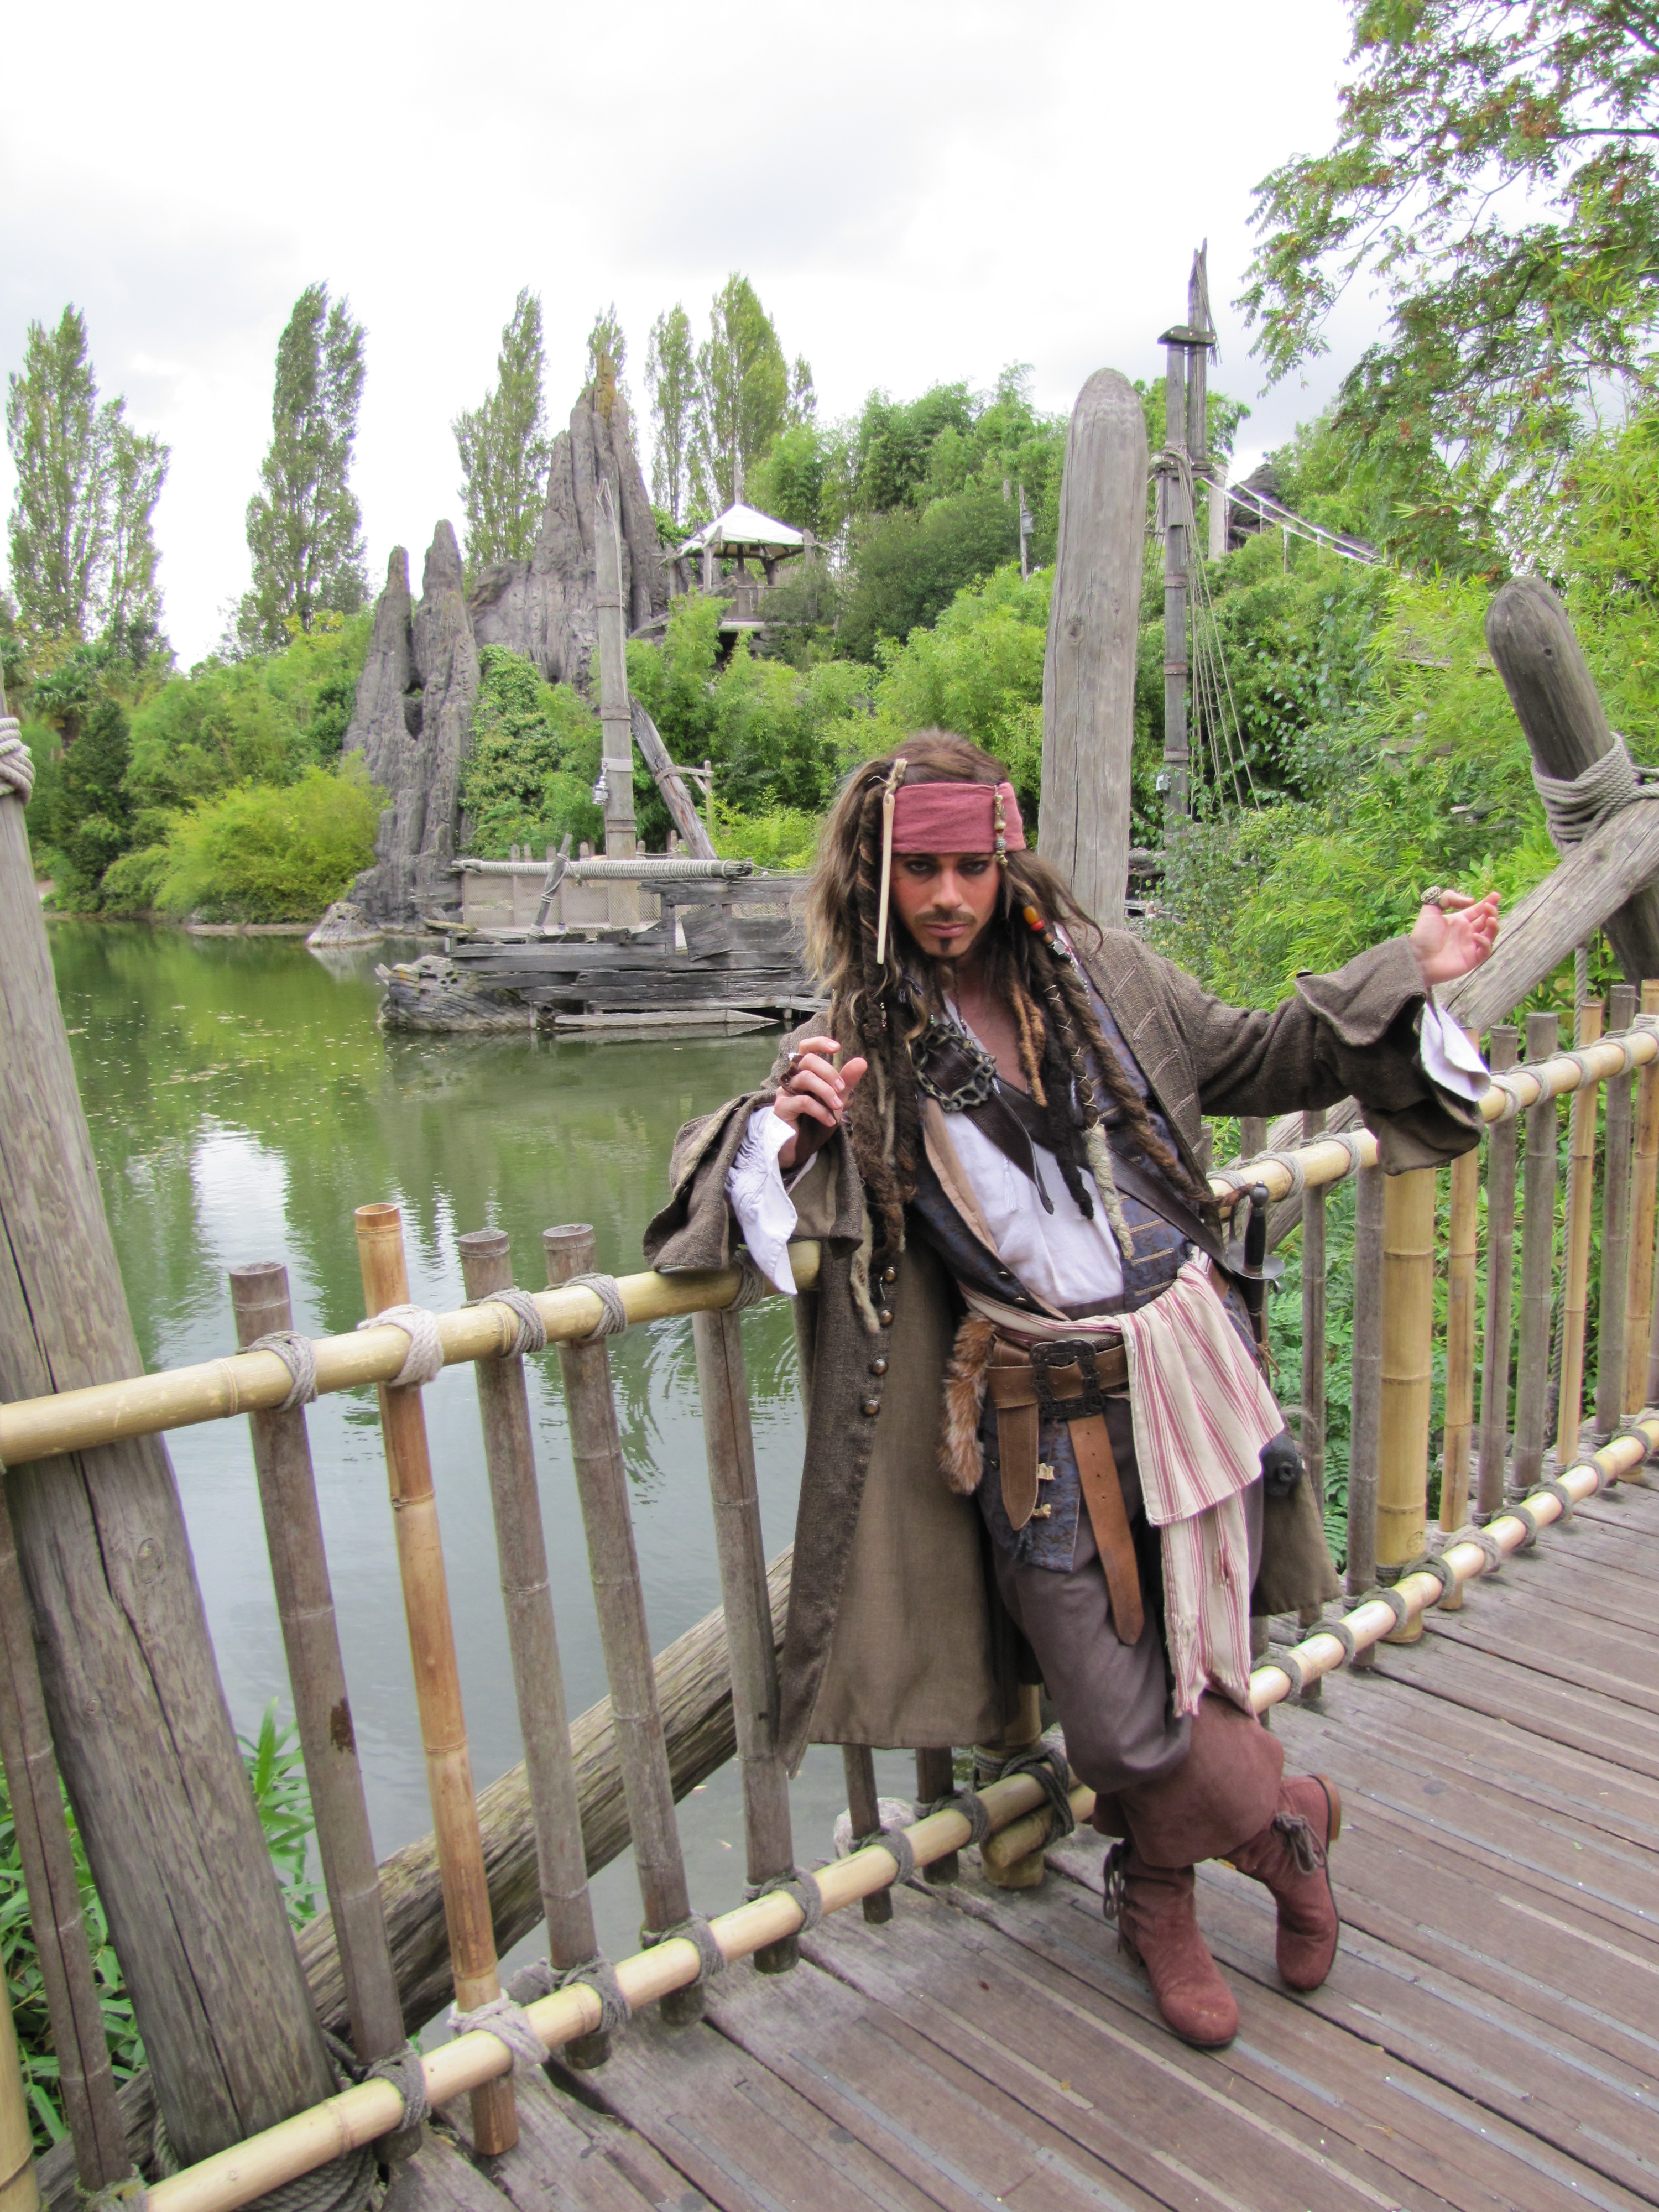 Jack Sparrow doing daily Meet'n'Greets